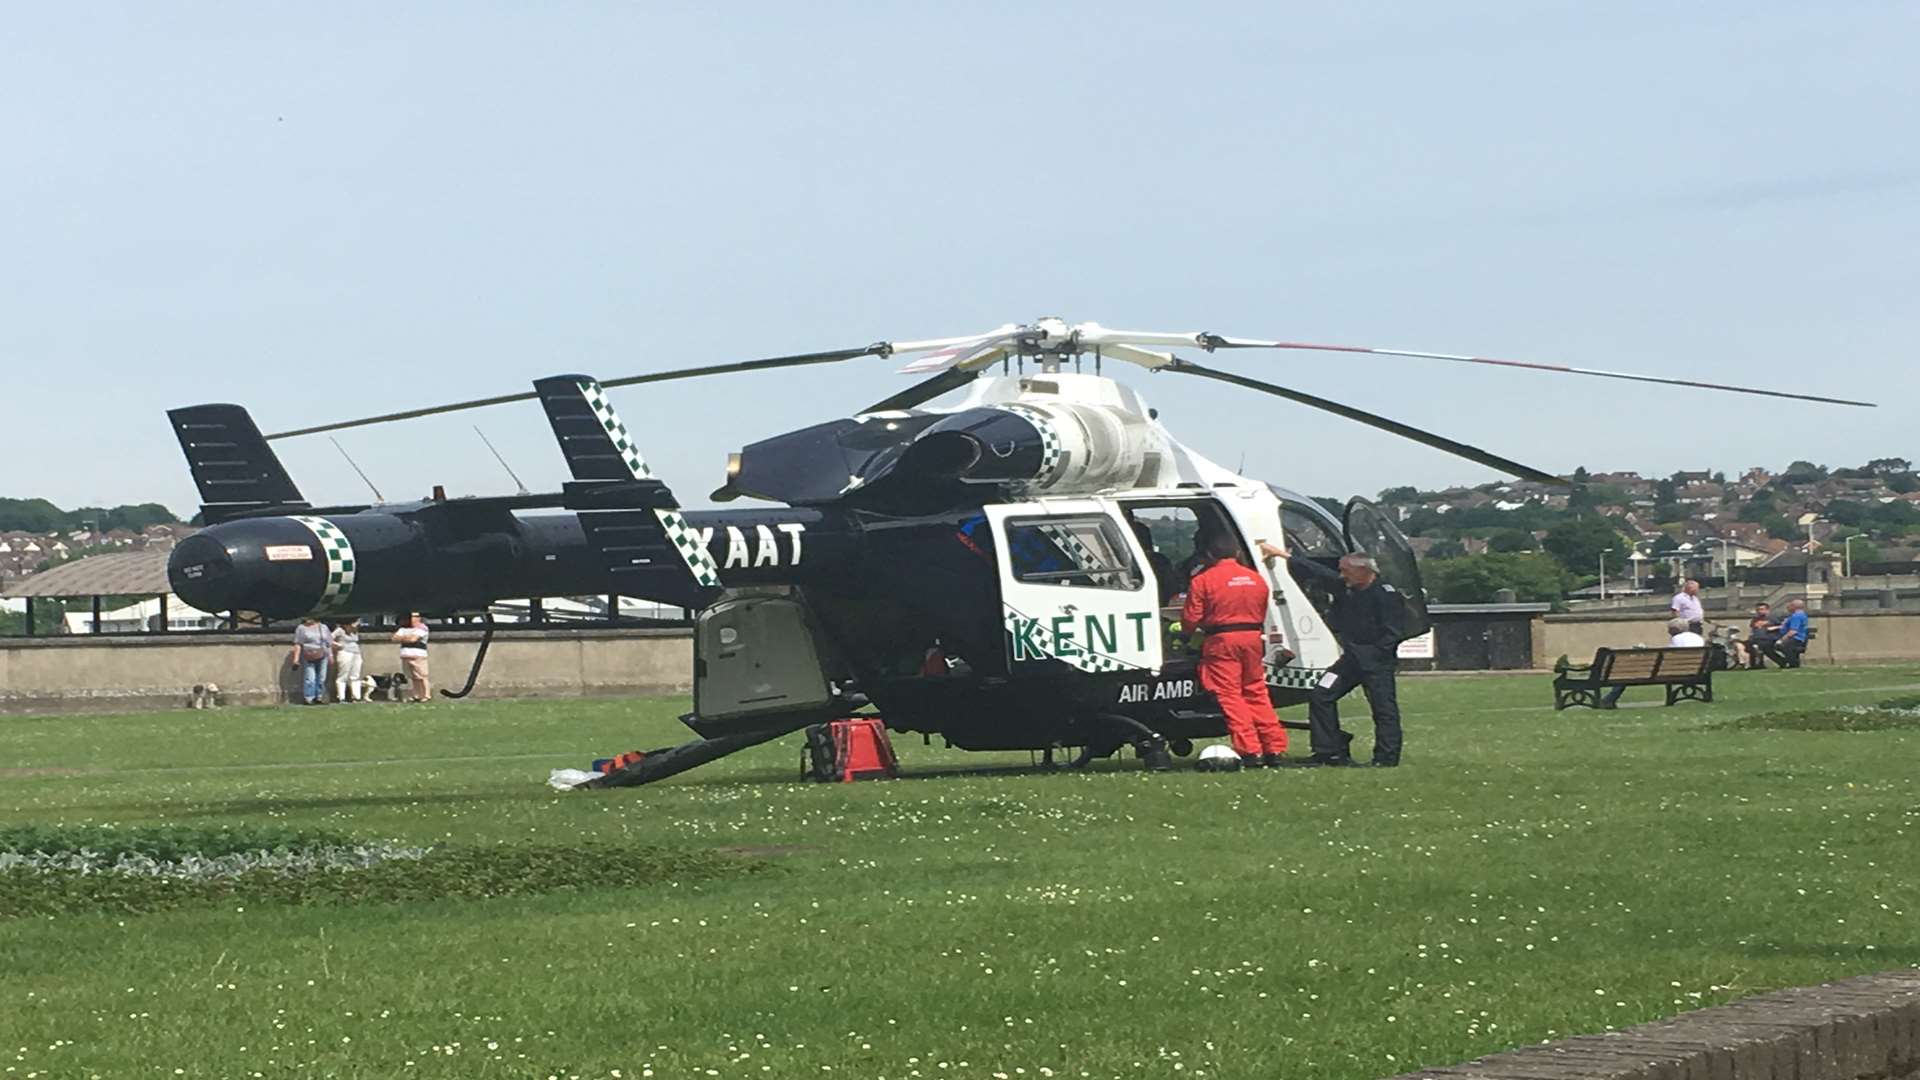 The man was airlifted to hospital after the incident